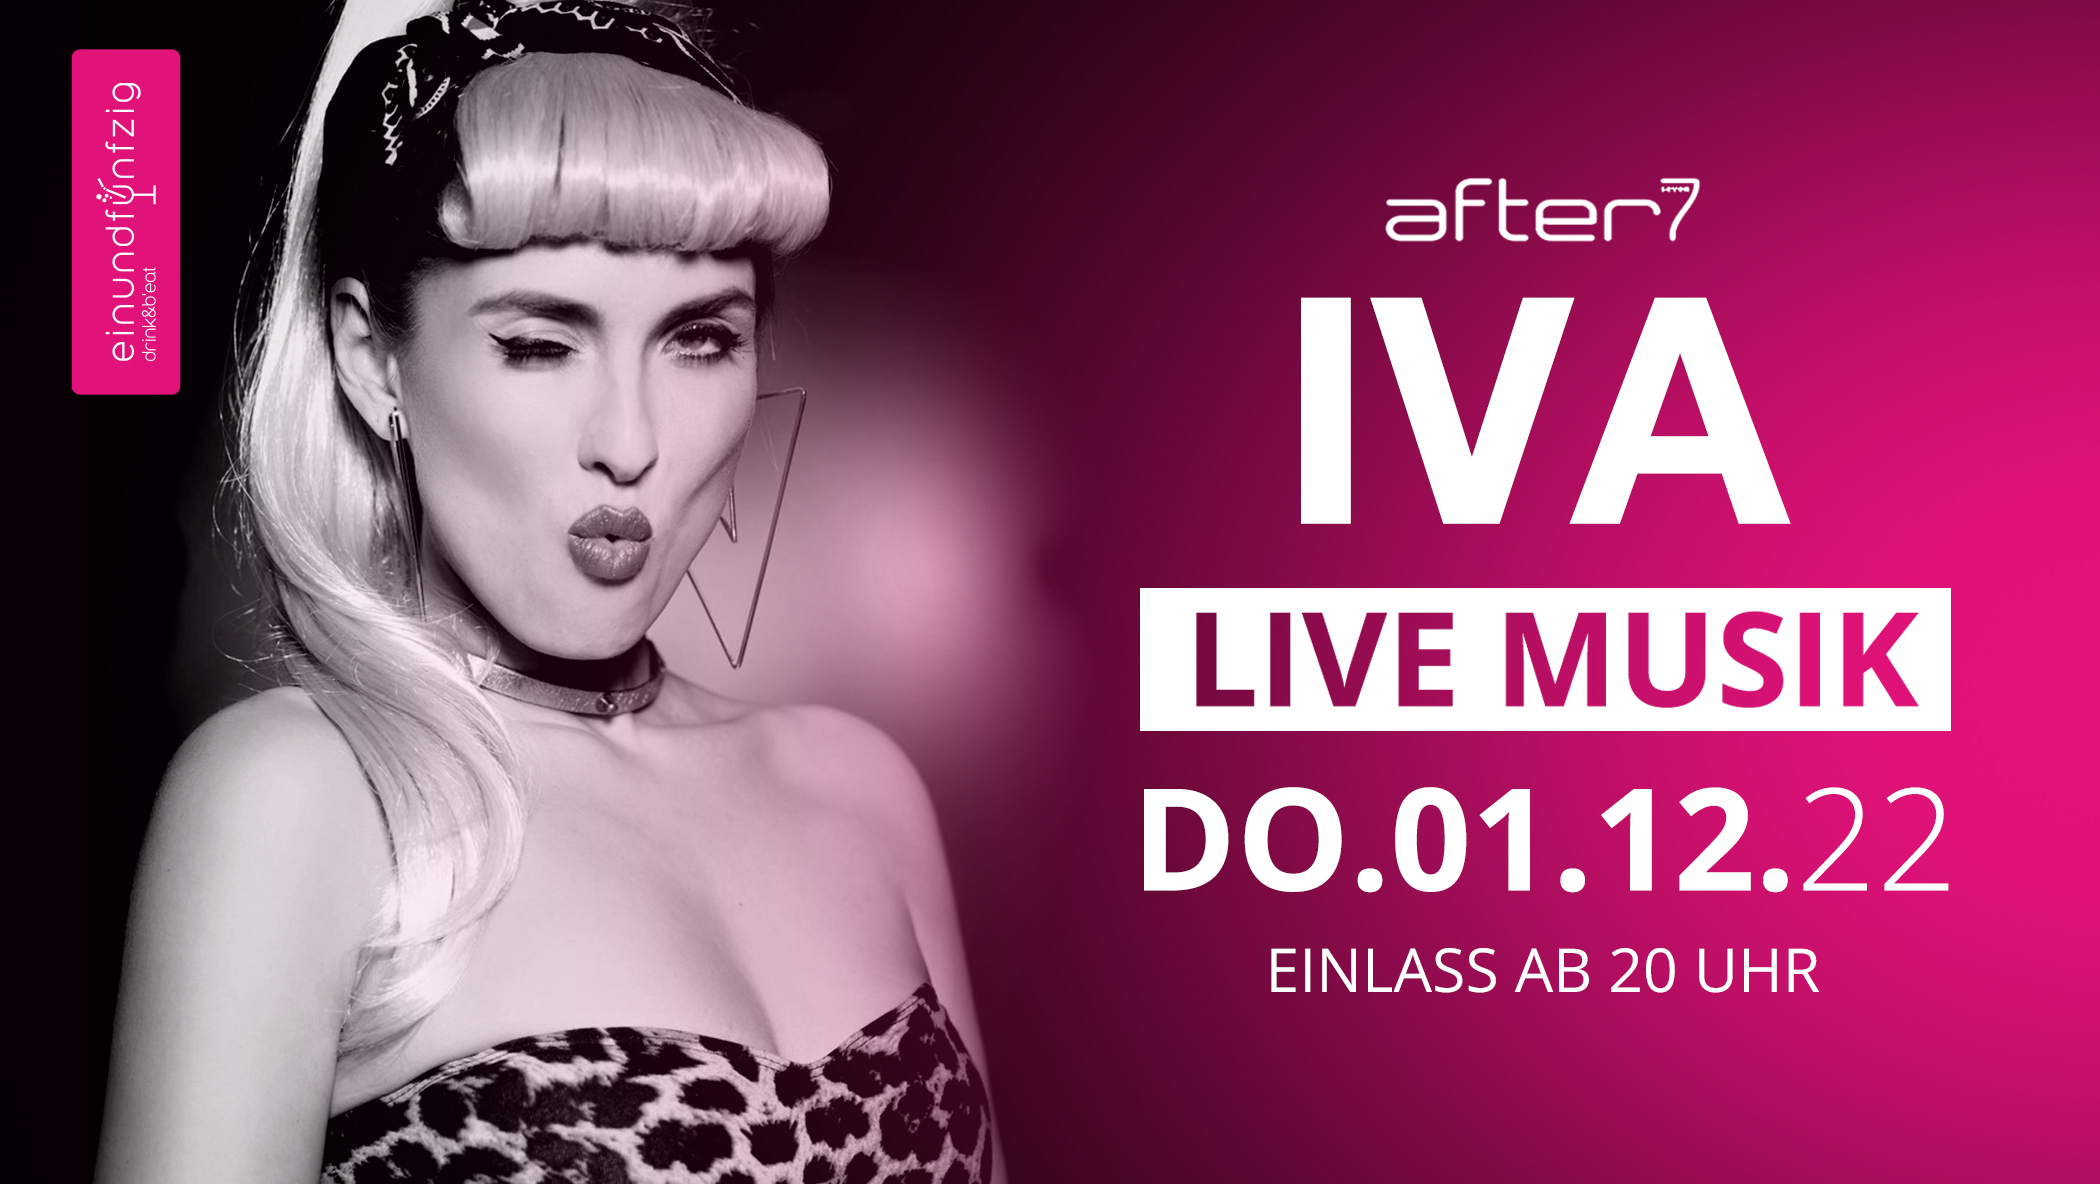 01.12.2022 – IVA – After7